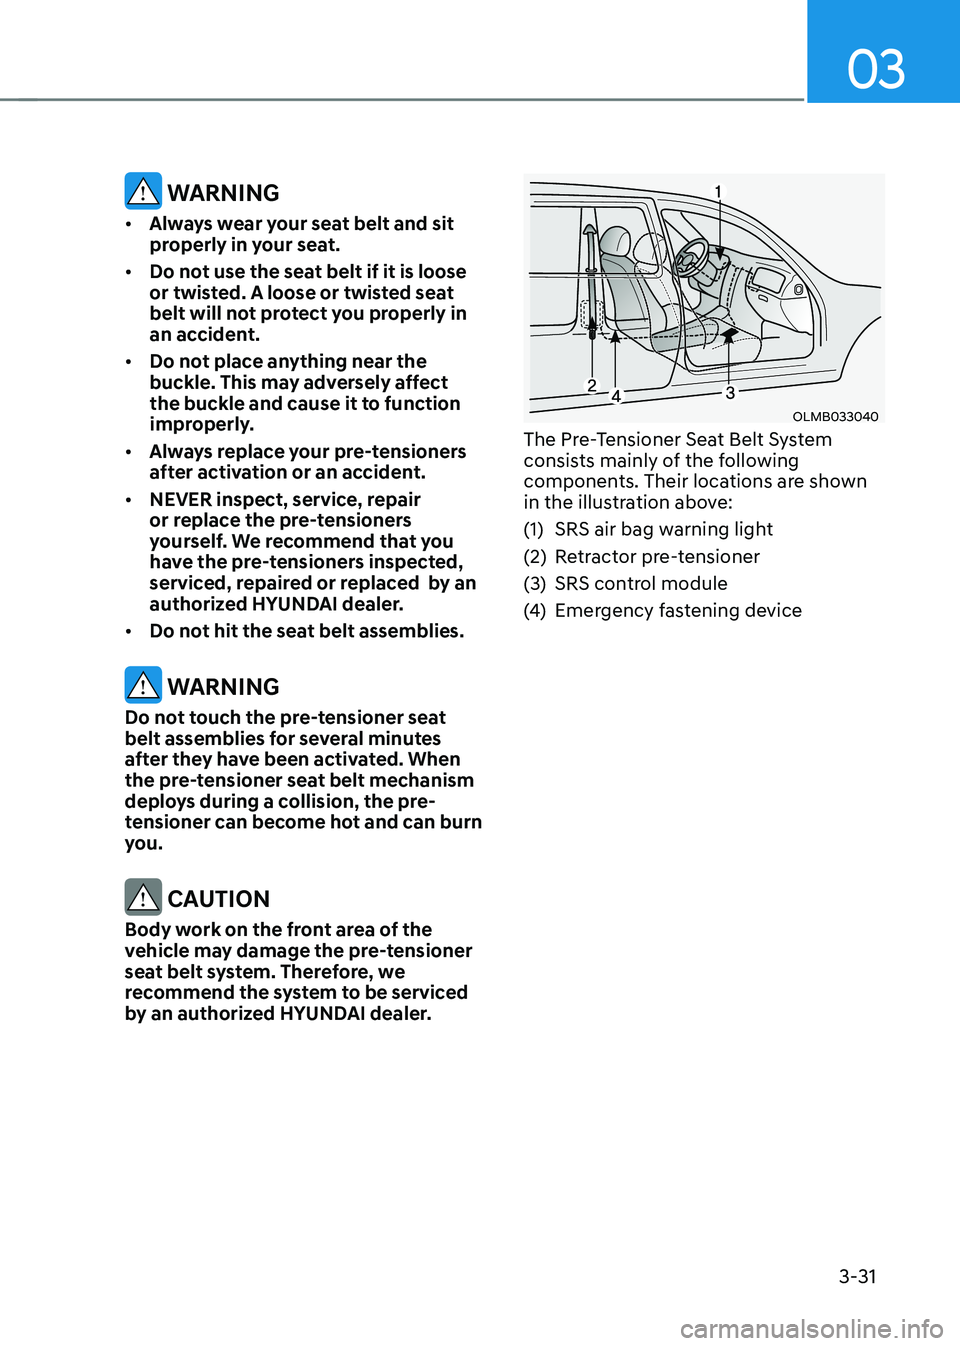 HYUNDAI TUCSON 2022 Repair Manual 03
3-31
 WARNING
•	Always wear your seat belt and sit 
properly in your seat.
•	 Do not use the seat belt if it is loose 
or twisted. A loose or twisted seat 
belt will not protect you properly in